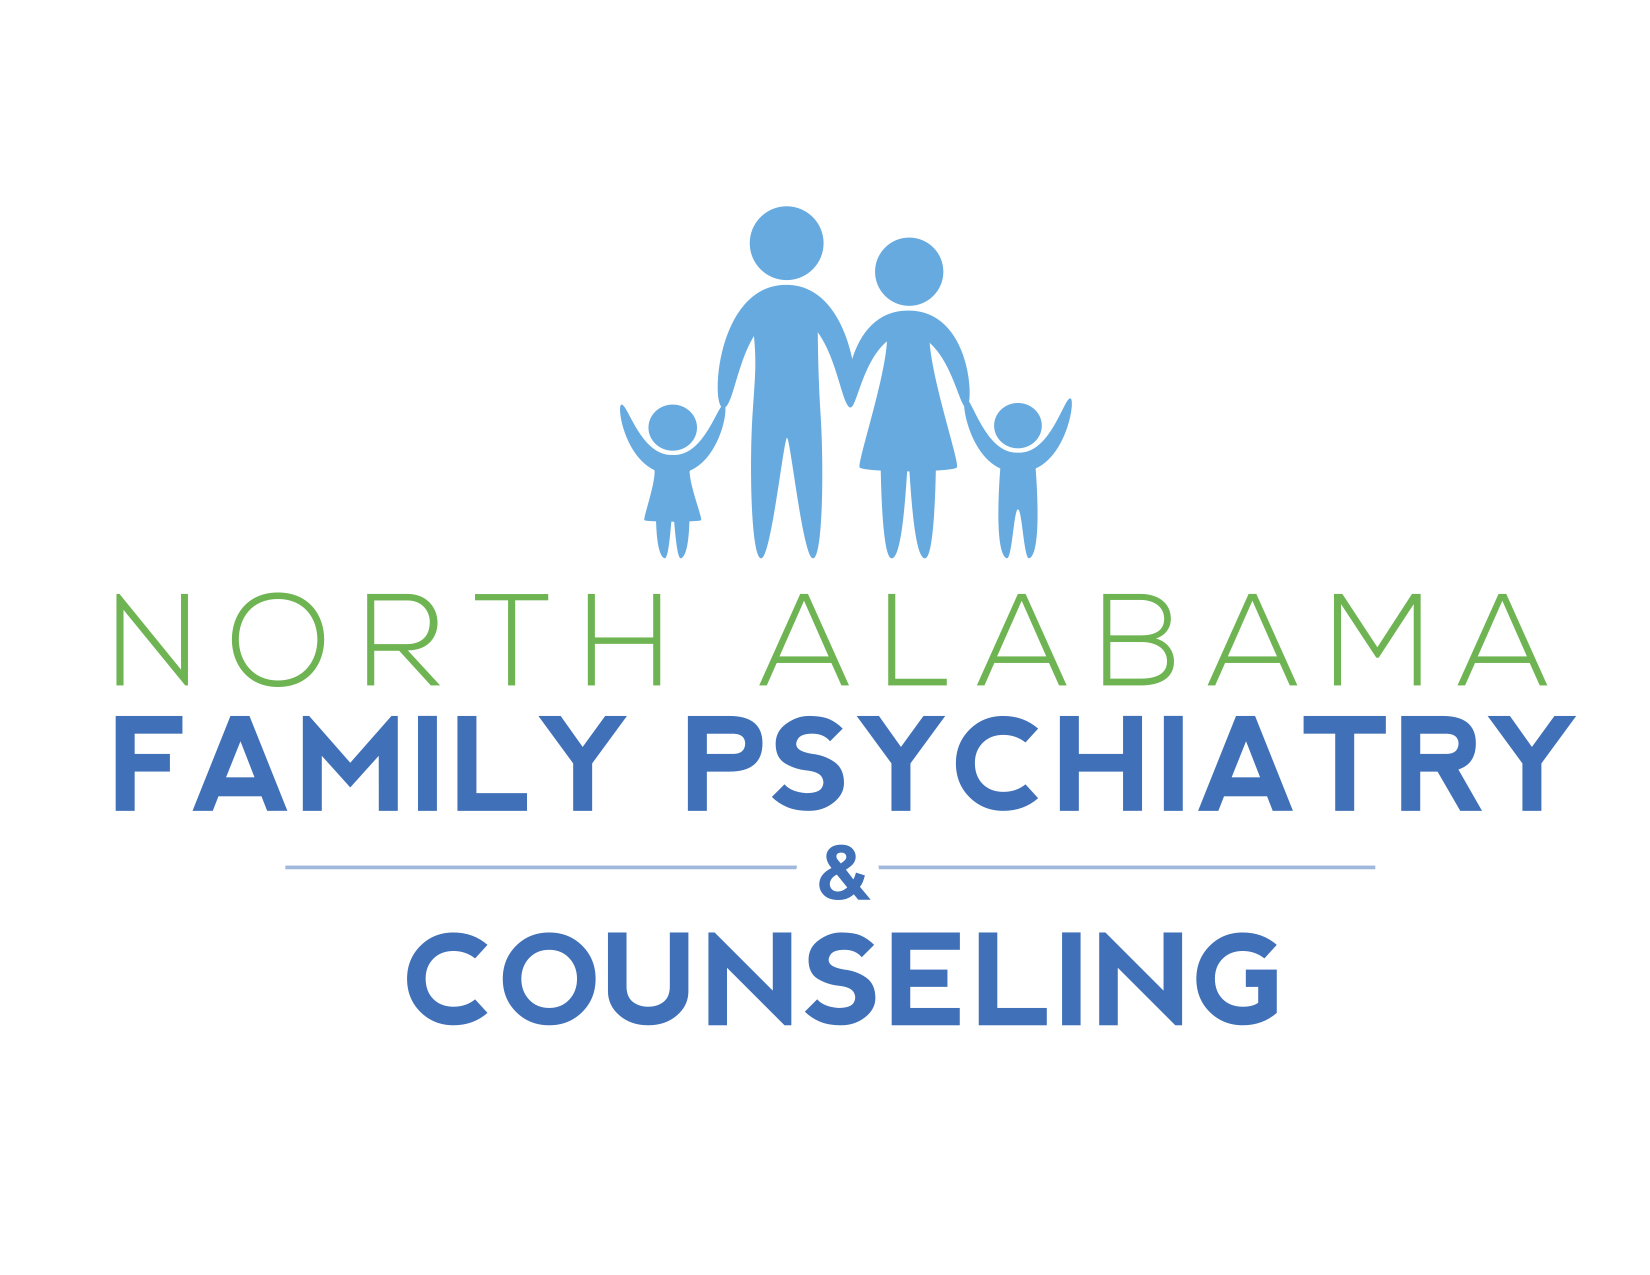 North Alabama Family Psychiatry & Counseling logo